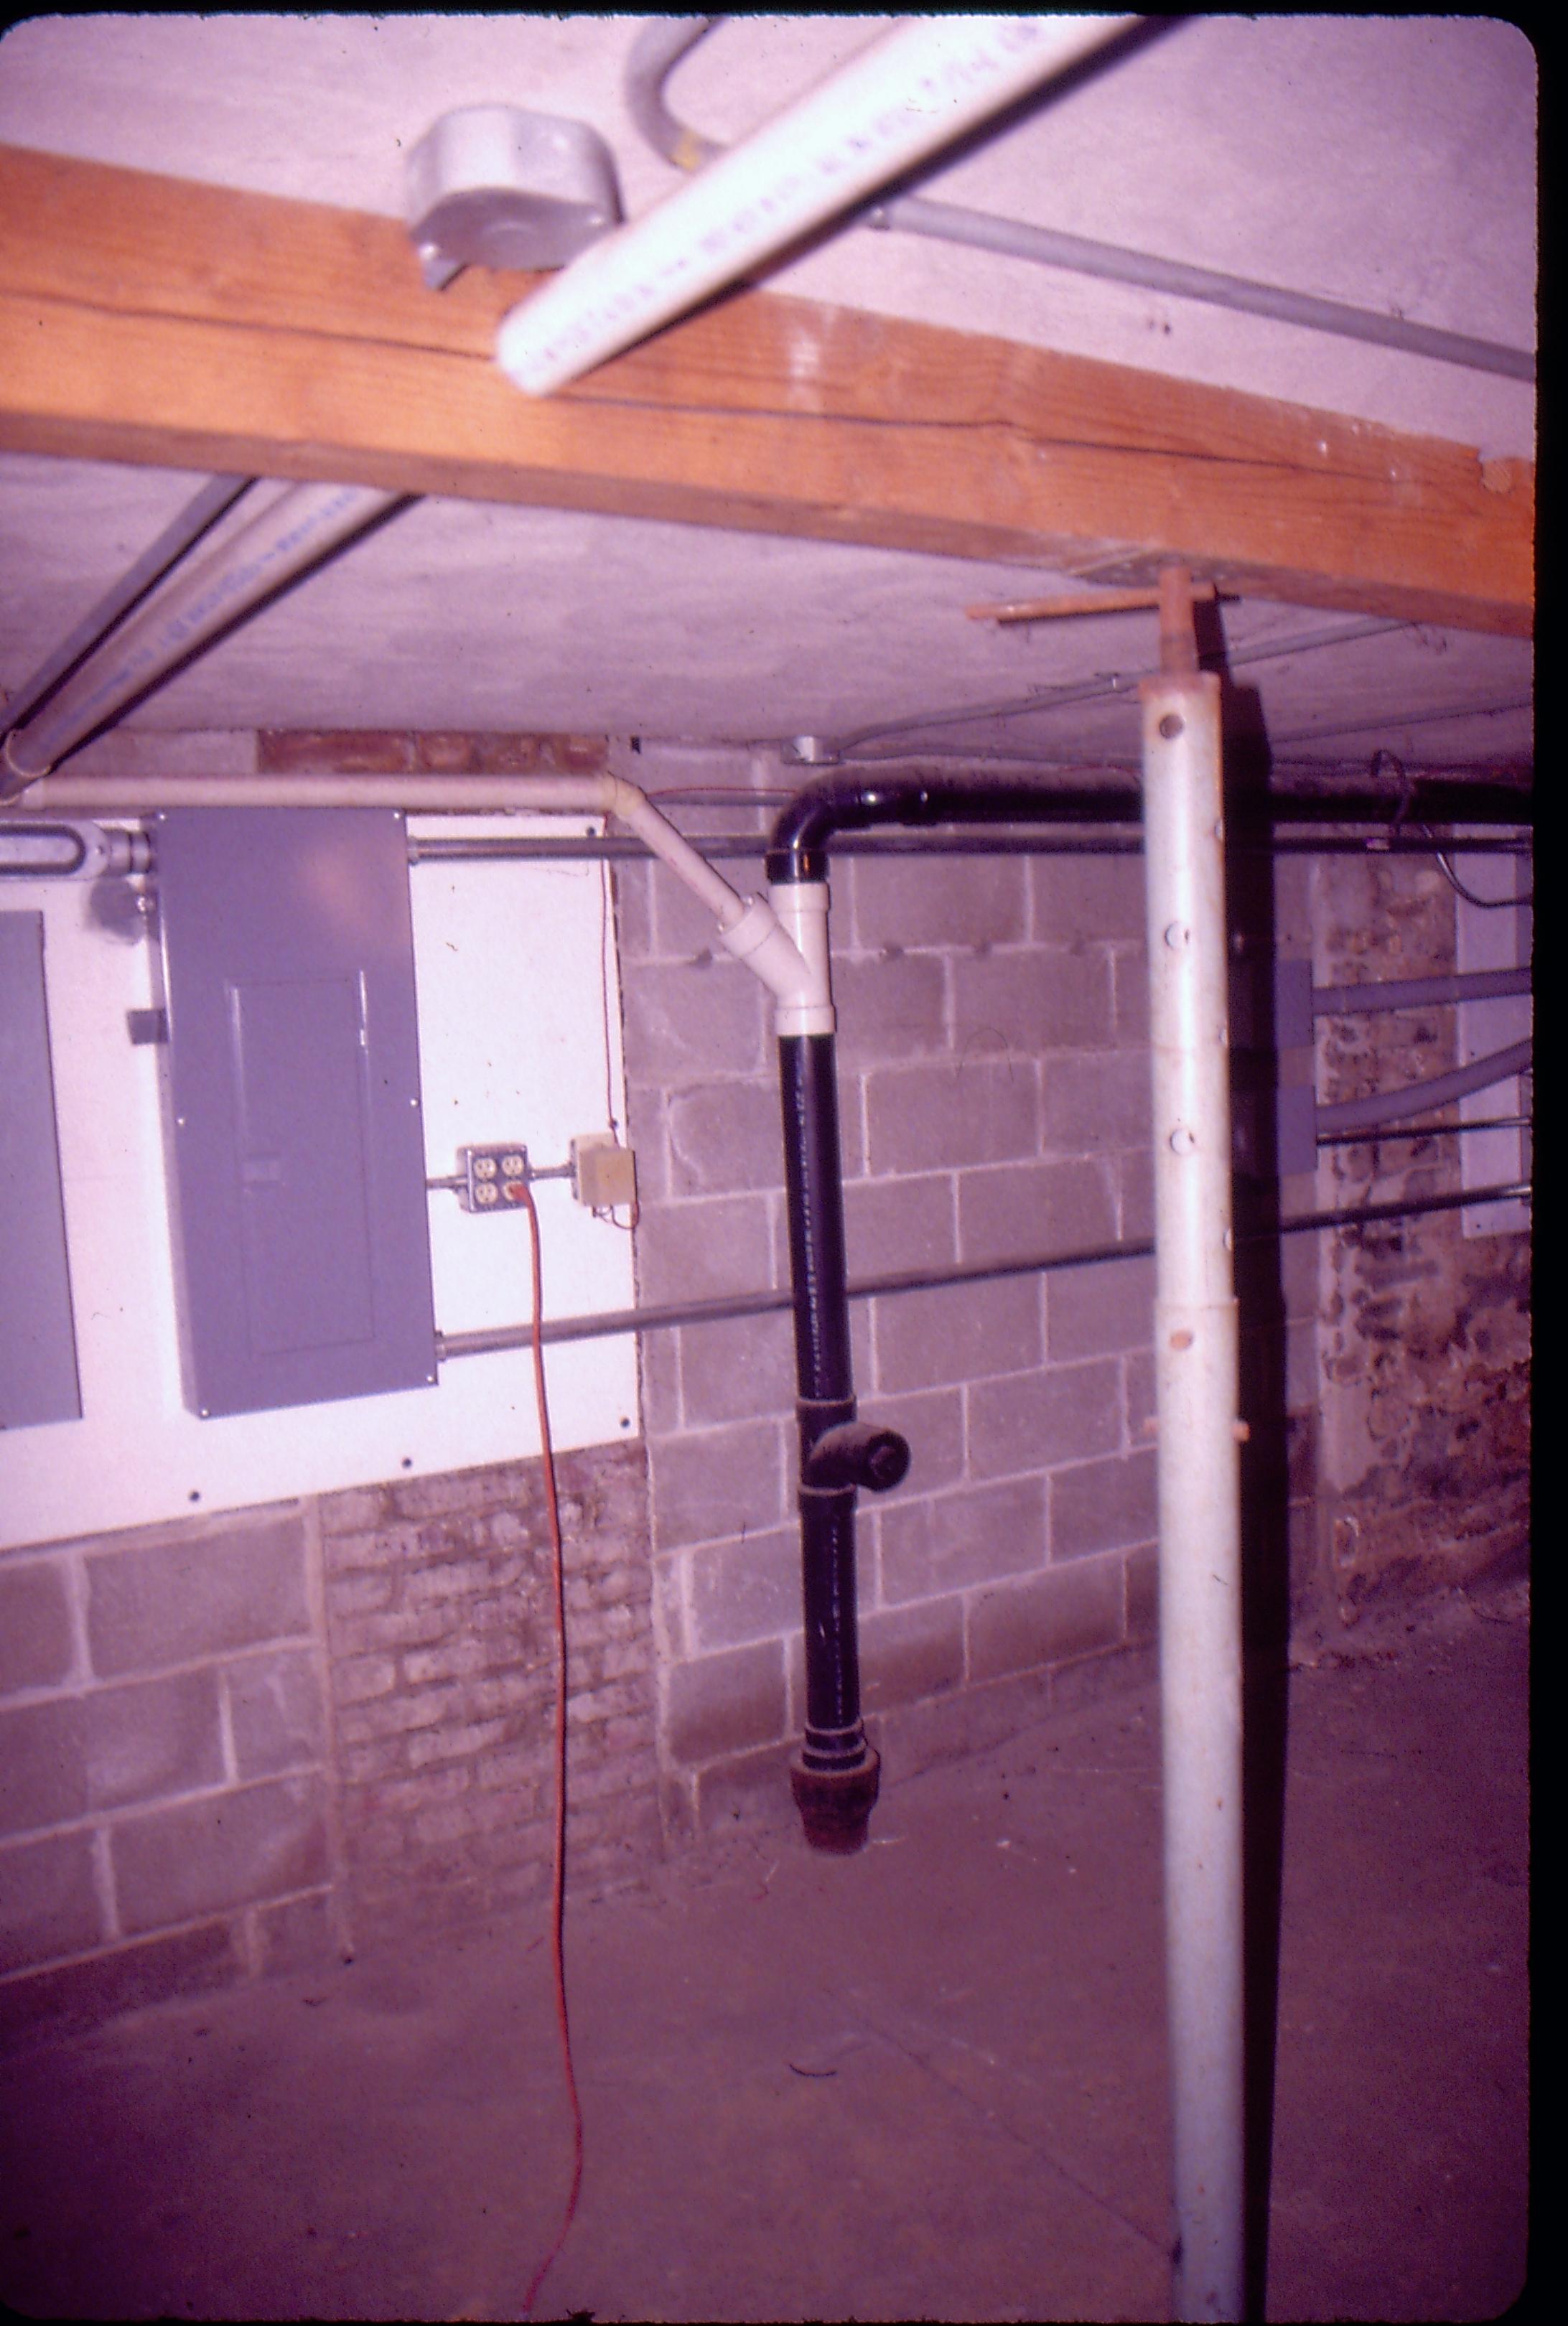 Lyon House - basement, PVC pipe in furnace room along back wall. Adjustable metal support in foreground right. Conduit, circuit break box and other utility equipment attached to back wall, a mix of old brick and modern cinder block. Floor is concrete. Wooden beam visible on ceiling with pipes and conduit running through it.  This area is under the kitchen on the 1st floor Looking Northwest from basement Lyon, Basement, utilities, PVC pipe, breaker box, cinder block, concrete